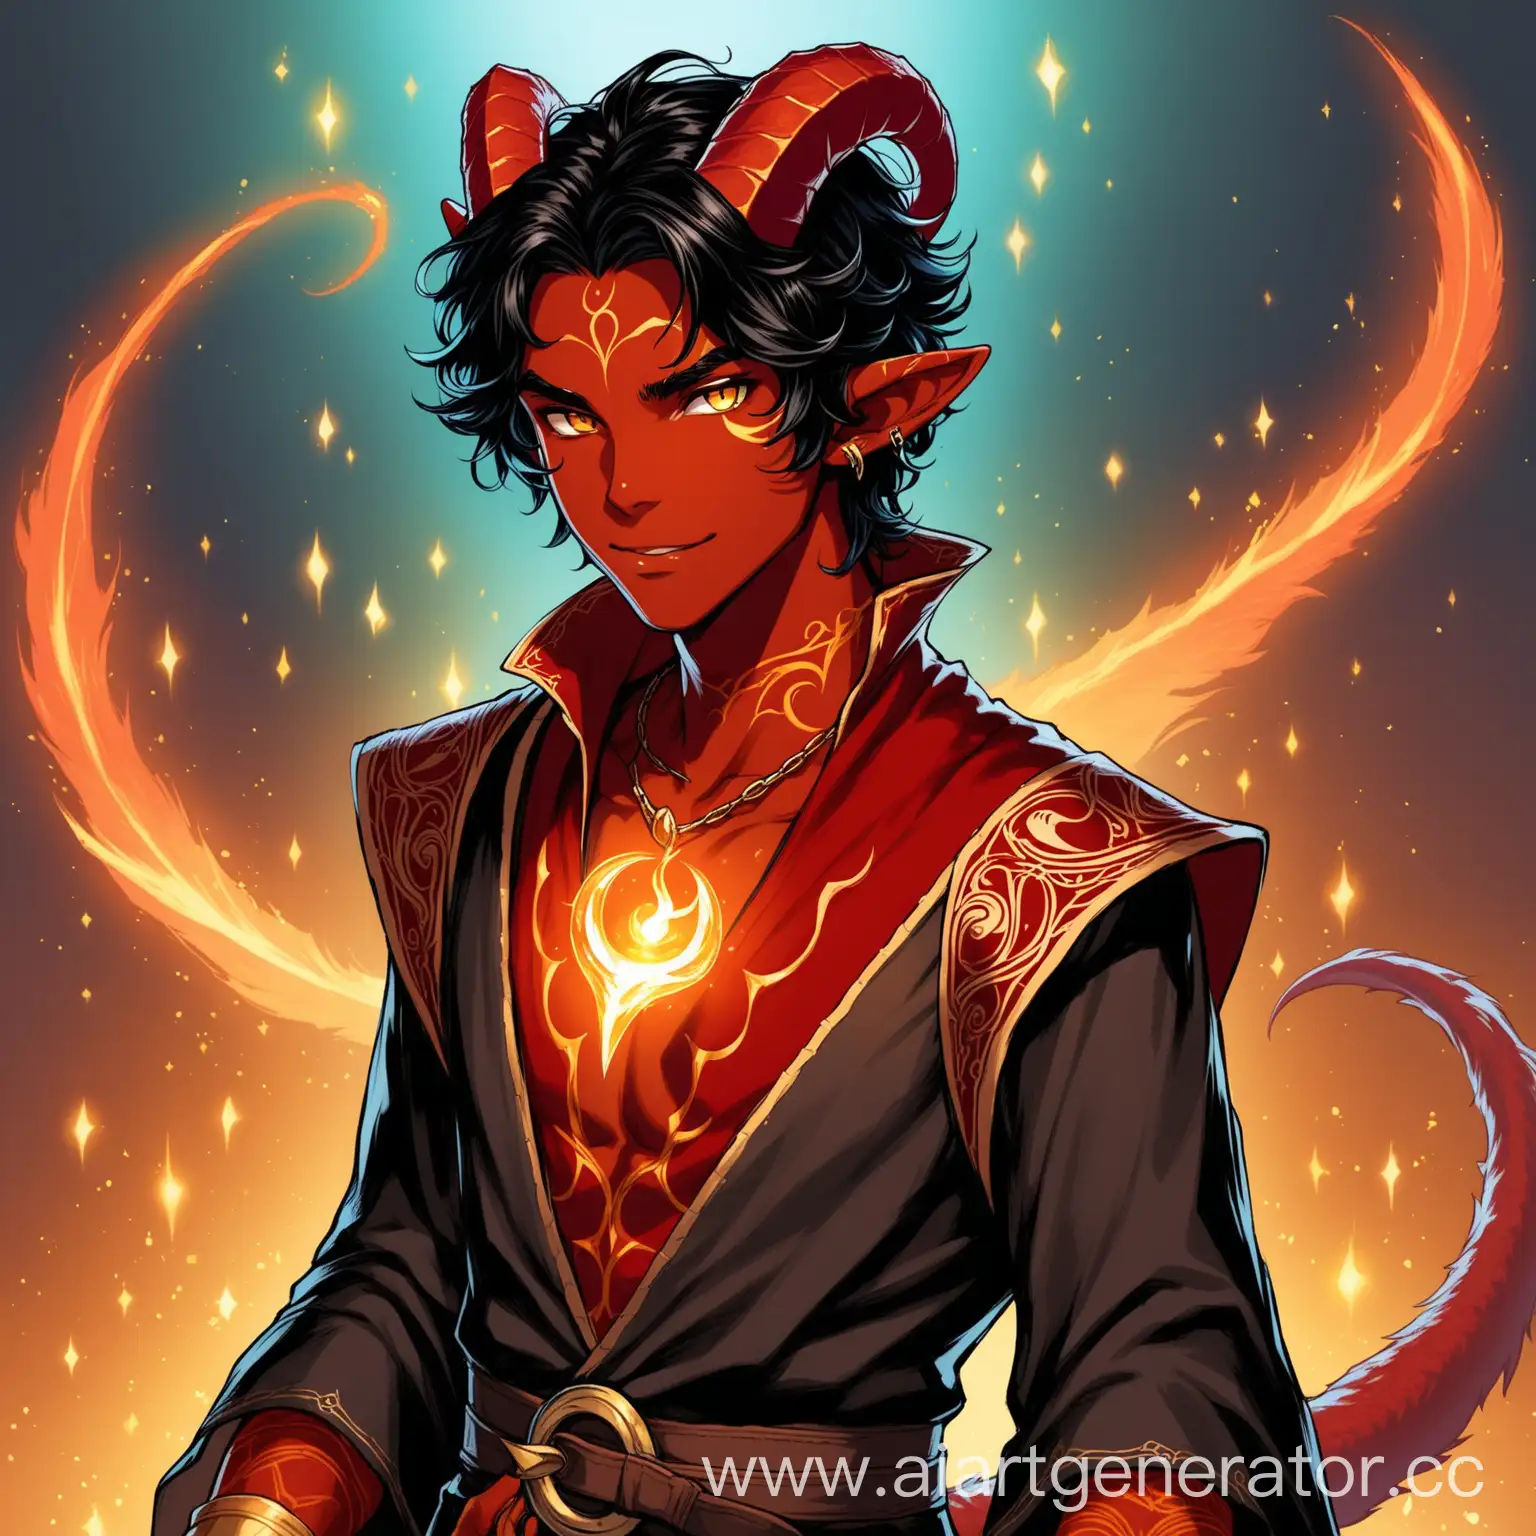 Young-Tiefling-Sorcerer-in-Regal-Attire-with-Golden-Eyes